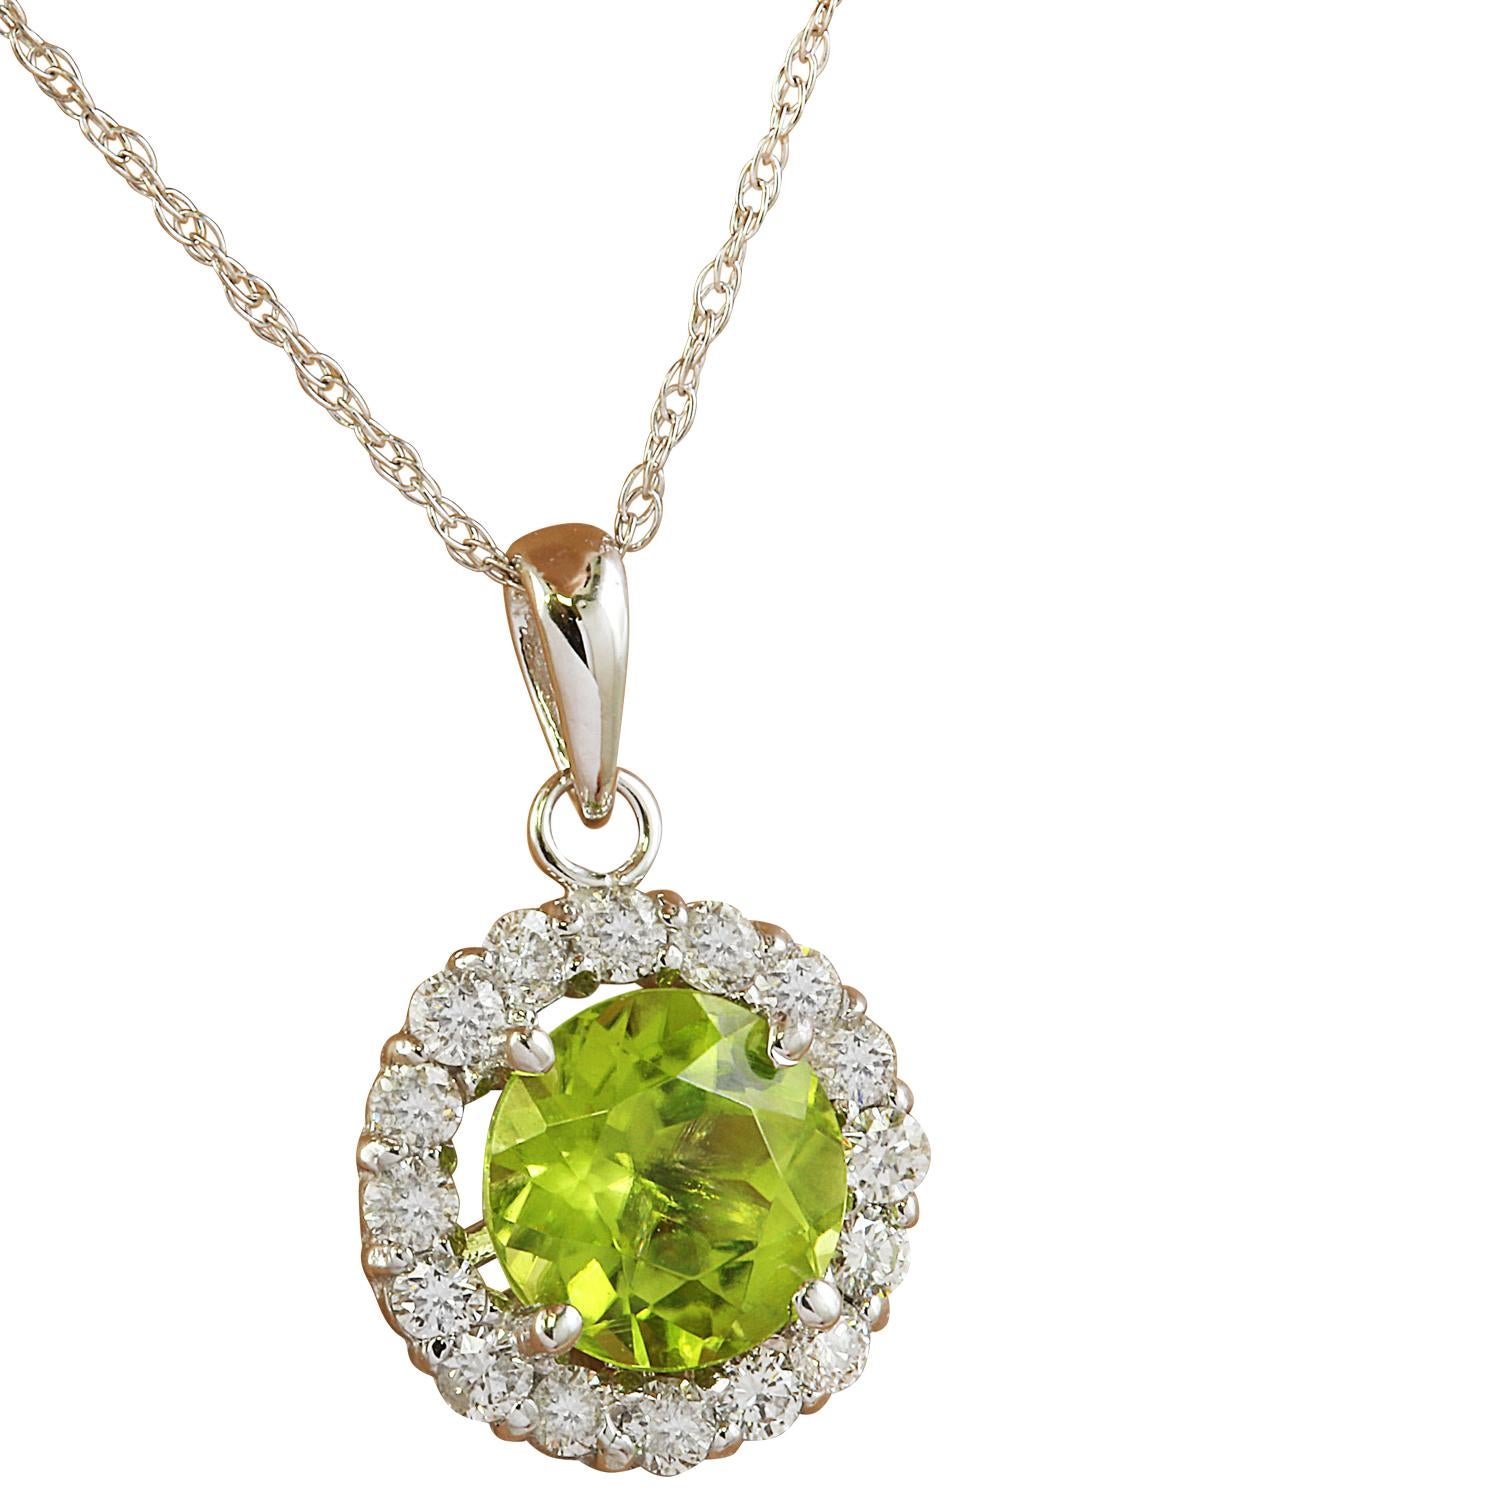 1.82 Carat Natural Peridot 14 Karat Solid White Gold Diamond Necklace
Stamped: 14K
Total Necklace Weight: 0.90 Grams
Necklace Length 18 Inches
Peridot Weight: 1.50 Carat (7.00x7.00 Millimeters)
Diamond Weight: 0.32 Carat (F-G Color, VS2-SI1 Clarity)